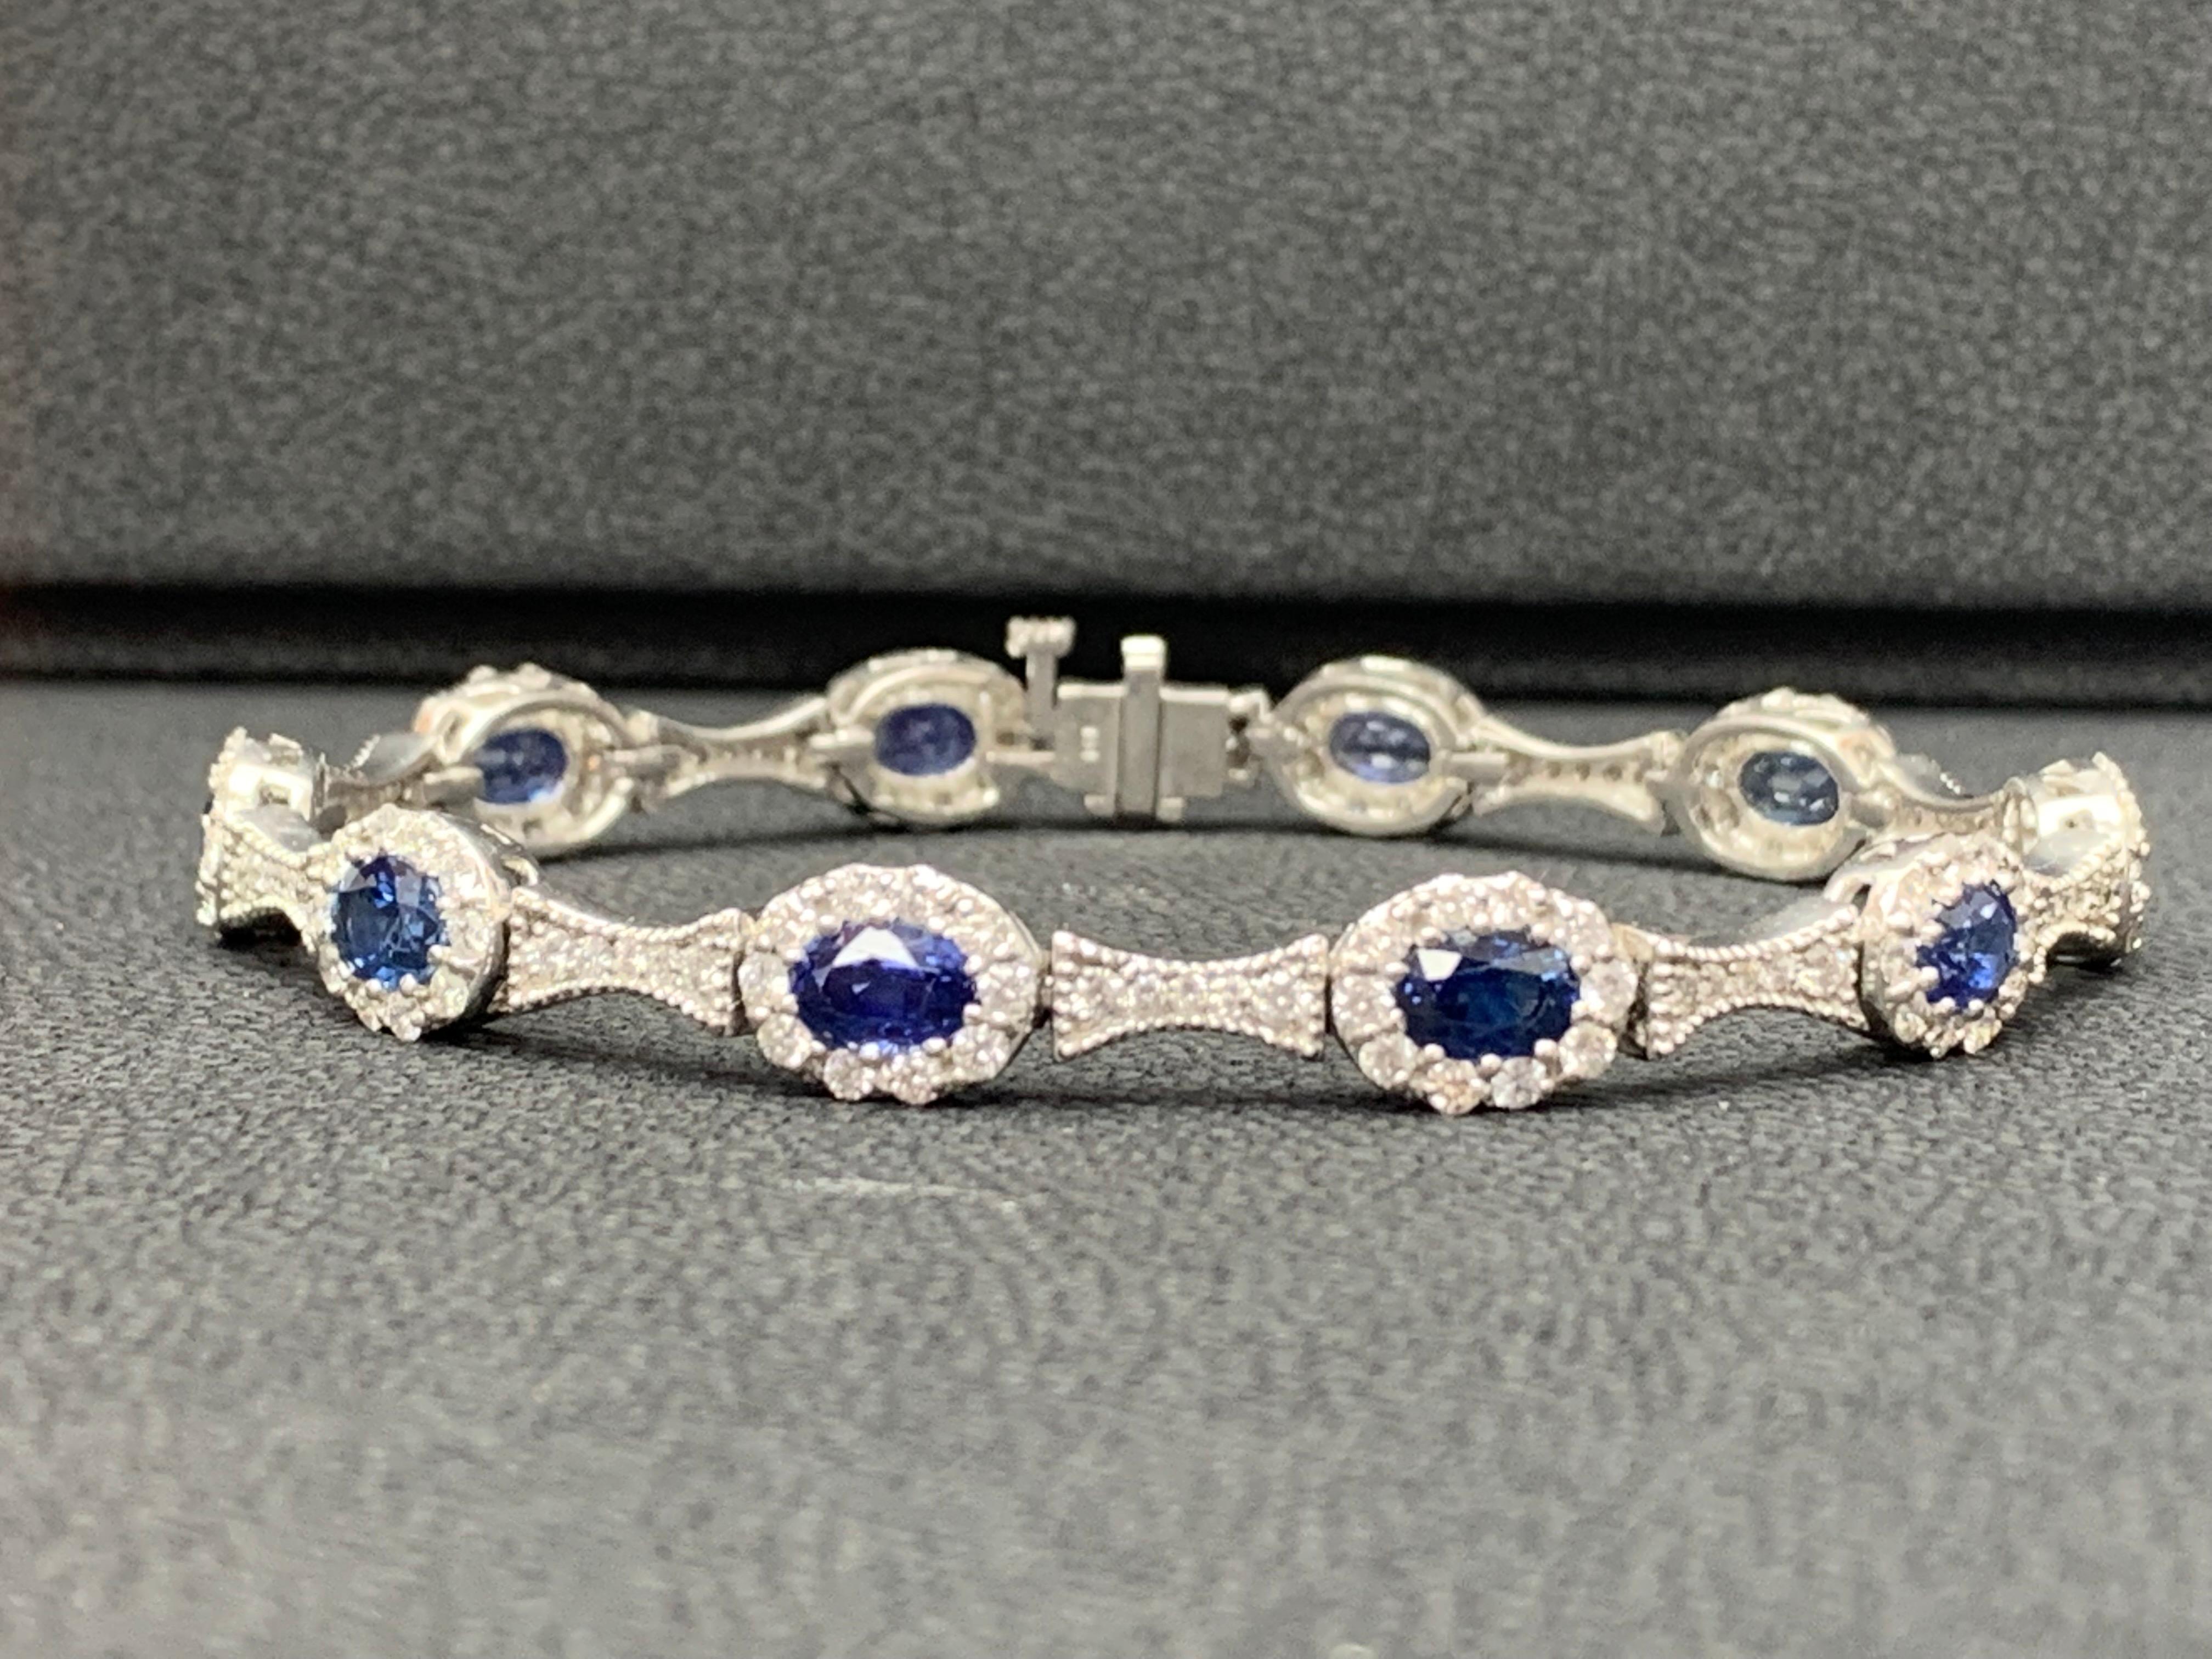 An exquisite and luxurious bracelet showcasing 6.19 carats of oval cut blue sapphires, surrounded by brilliant round diamonds weighing 2.80 carats total. Set in an 14 karat white gold mounting.

All diamonds are GH color SI1 Clarity.
Available in